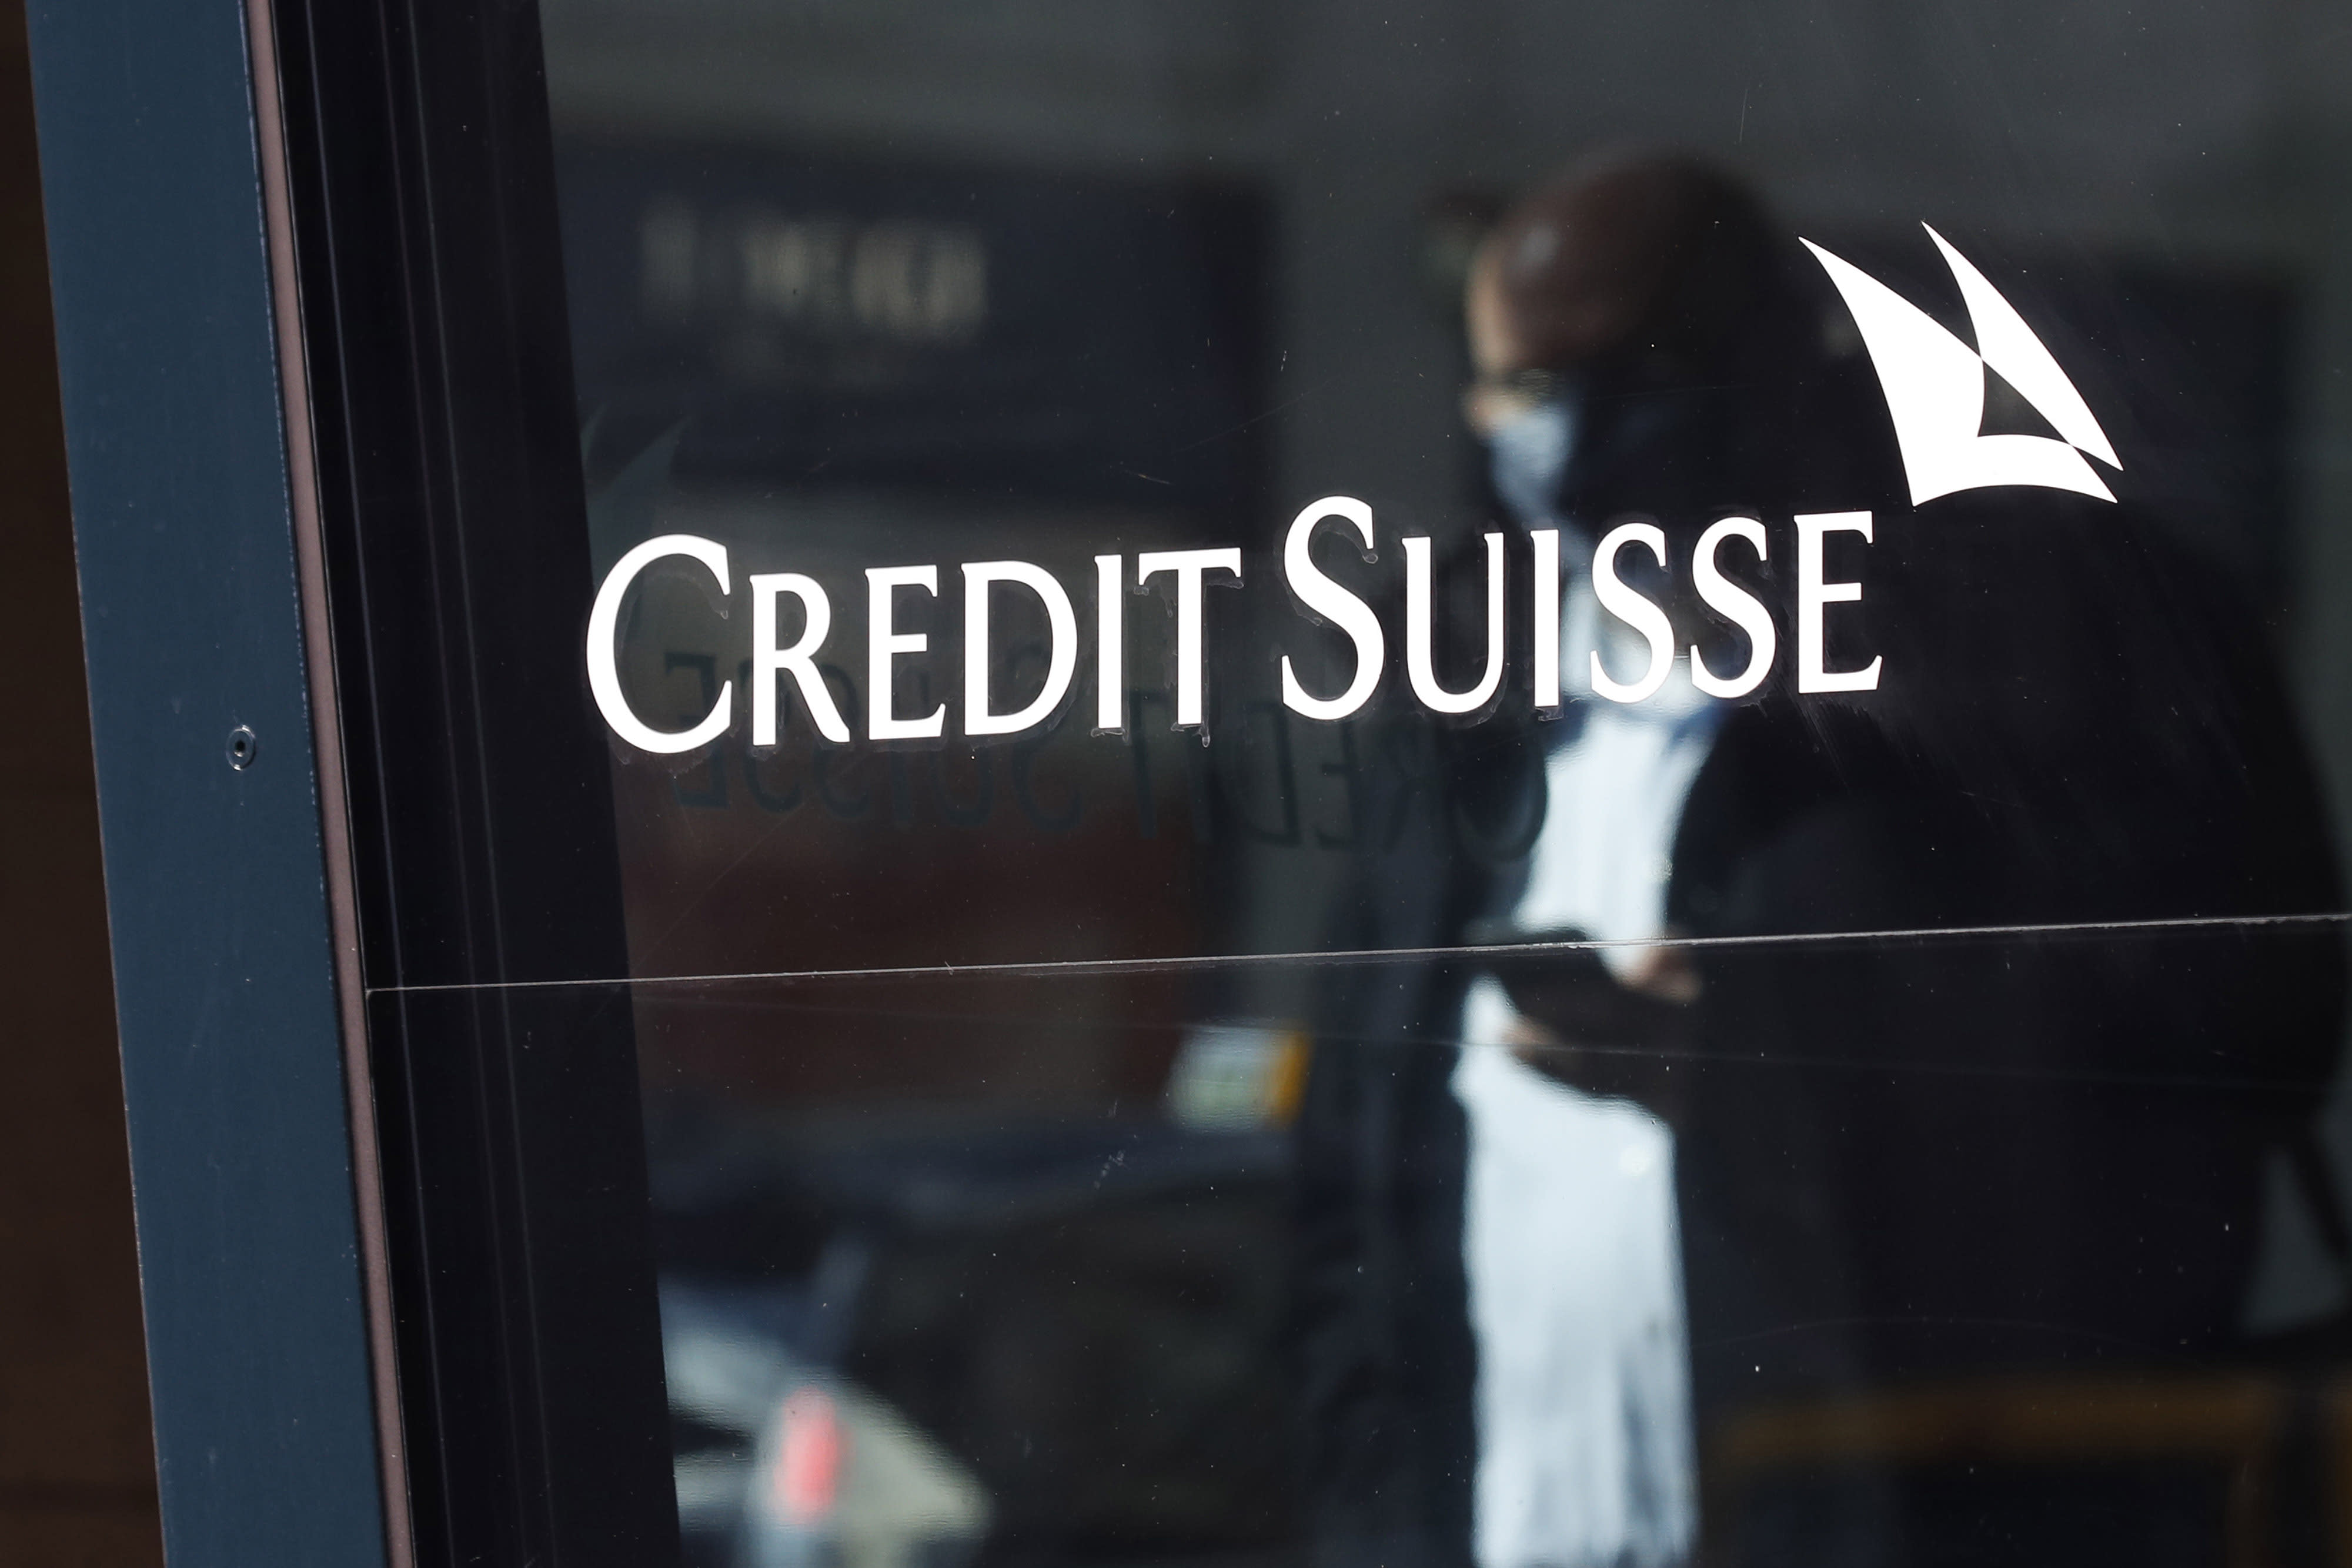 Credit Suisse earnings in the first quarter of 2021